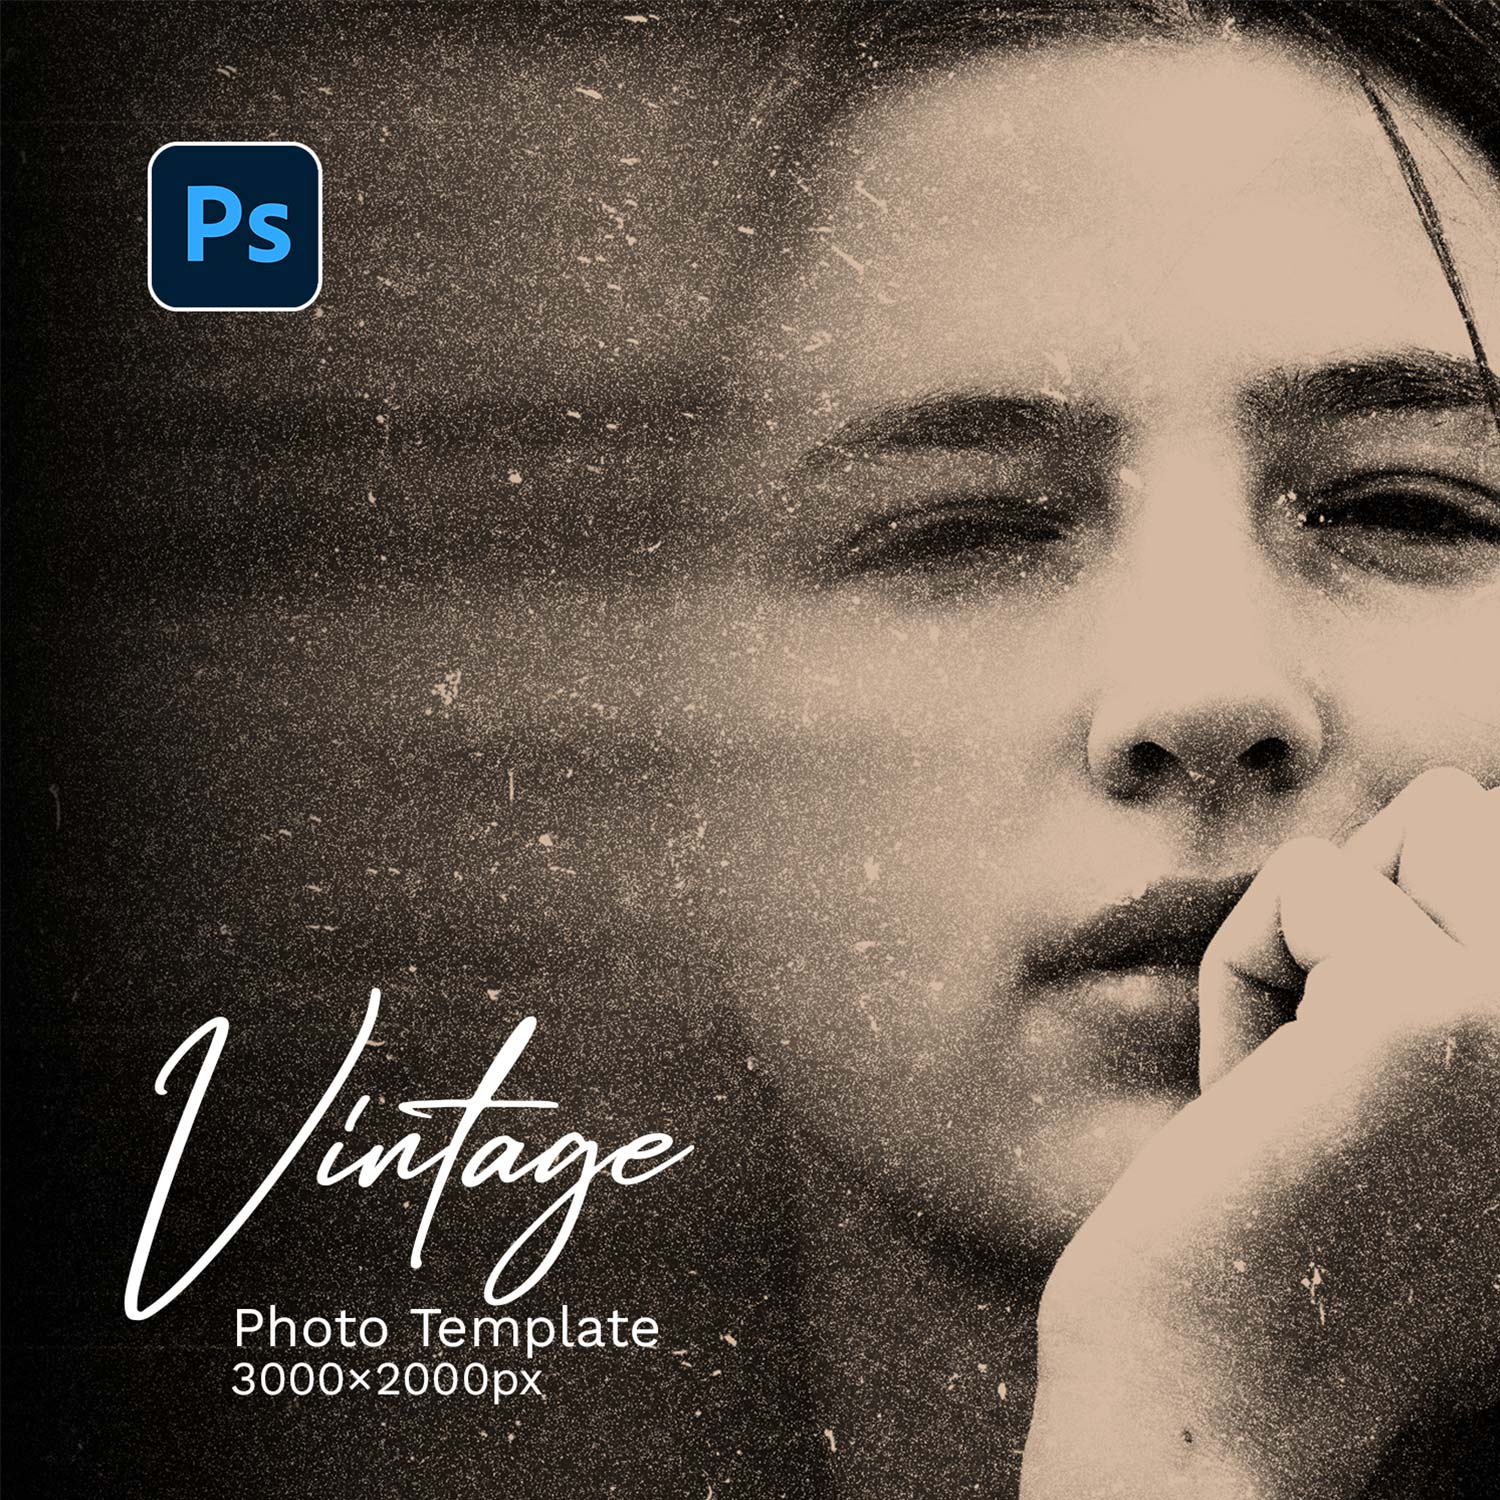 Vintage Photo Effect cover image.